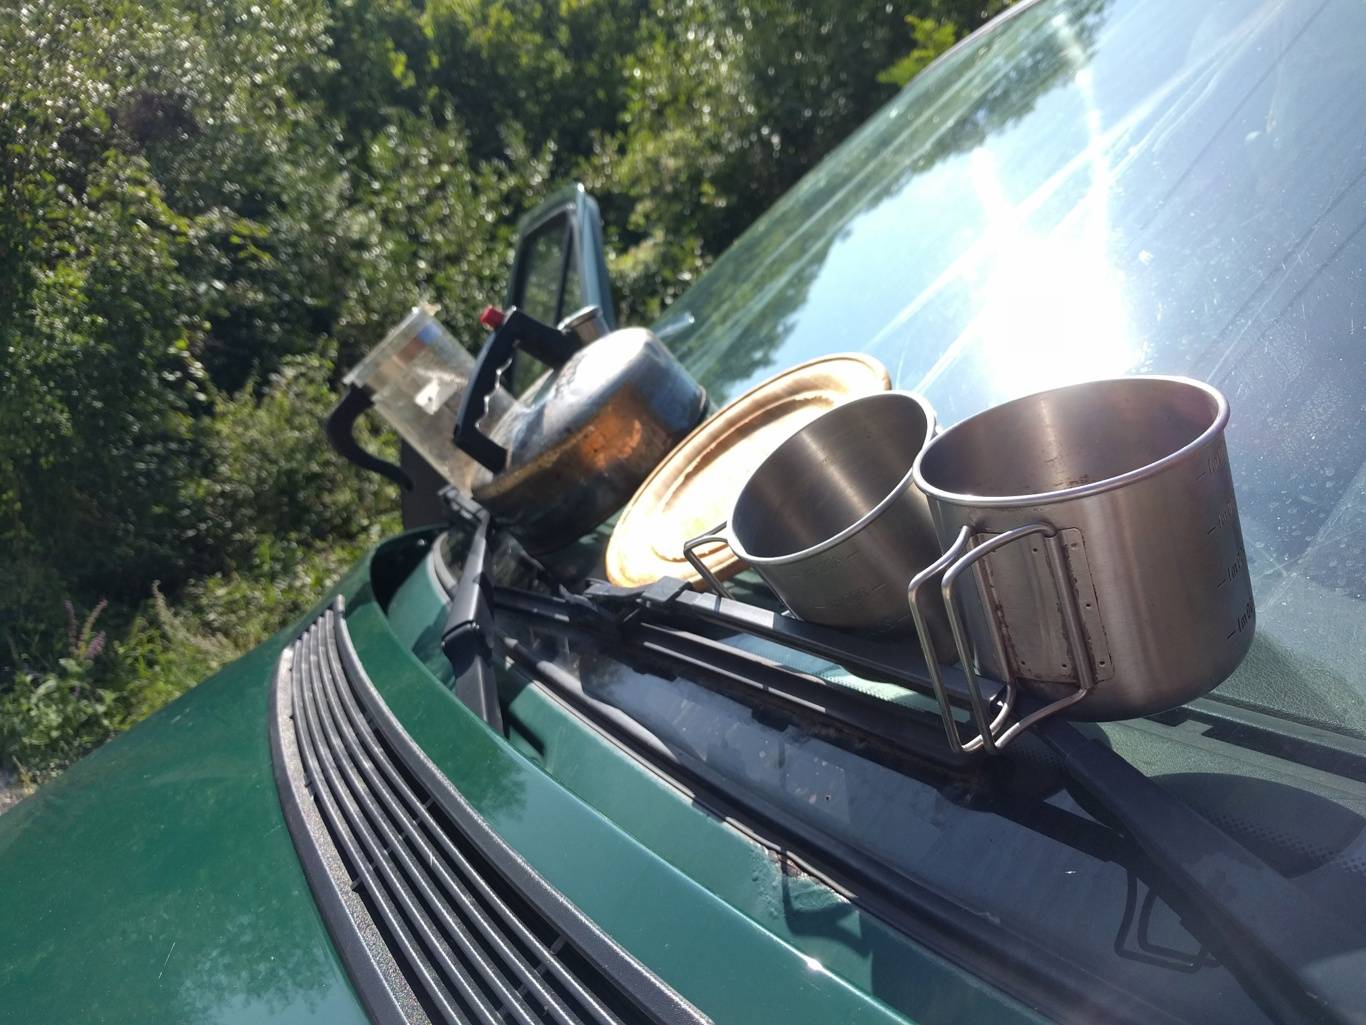 Camping life: dishes drying in the sun ☀️